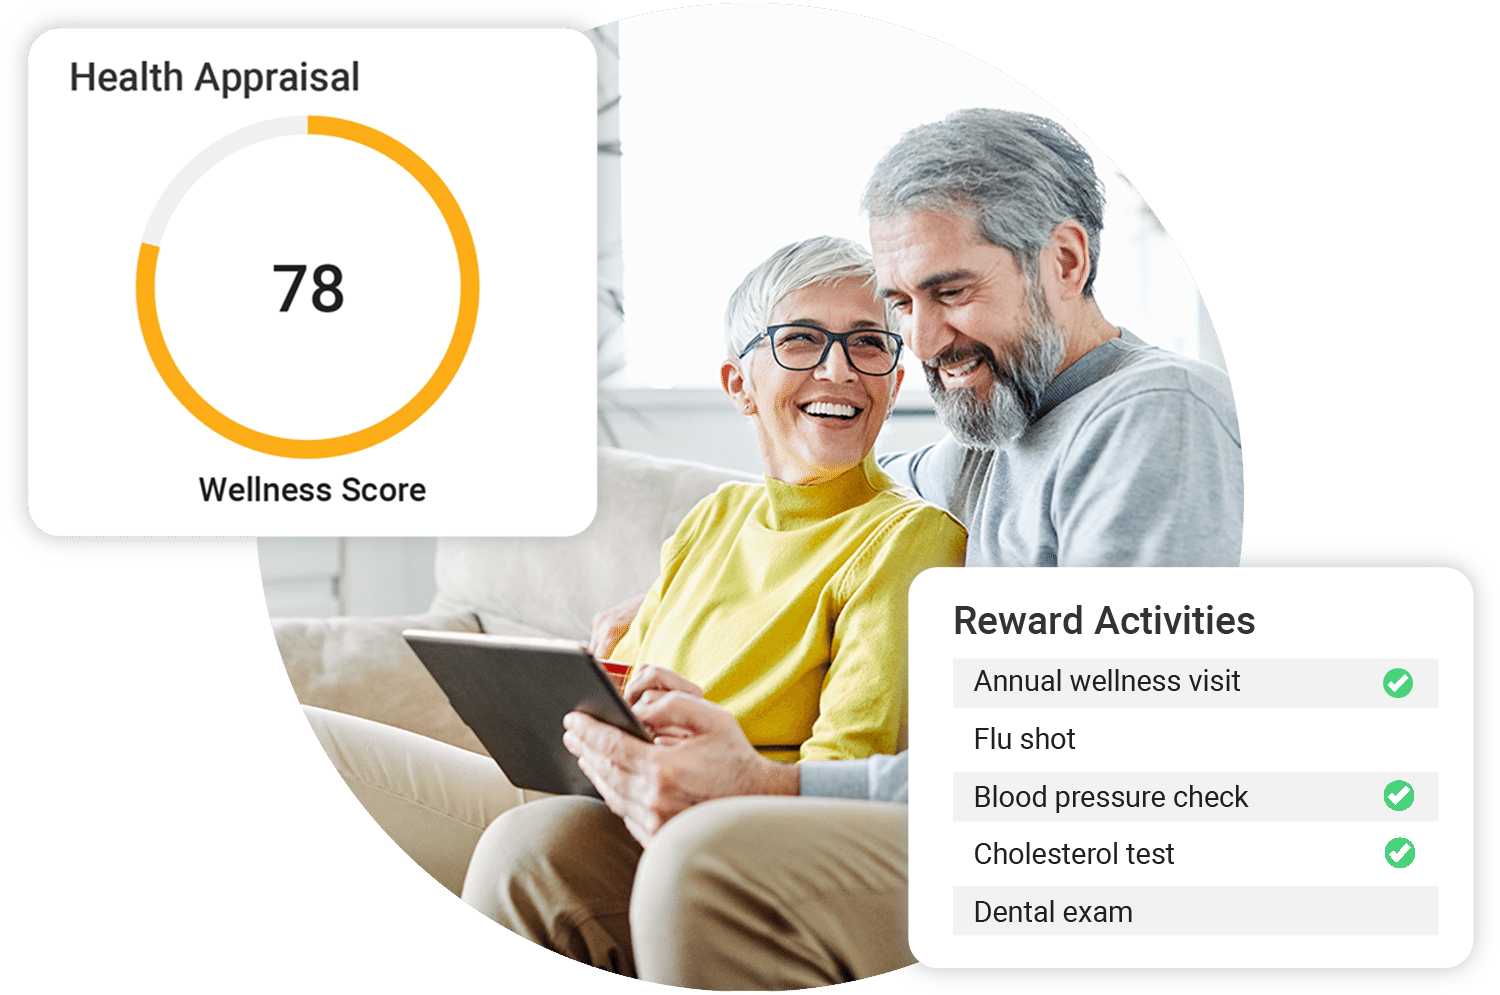 Elderly couple sitting on the couch smiling at an ipad with call out widgets showing a Health Appraisal with a wellness score of 78 and a summary of their reward activities